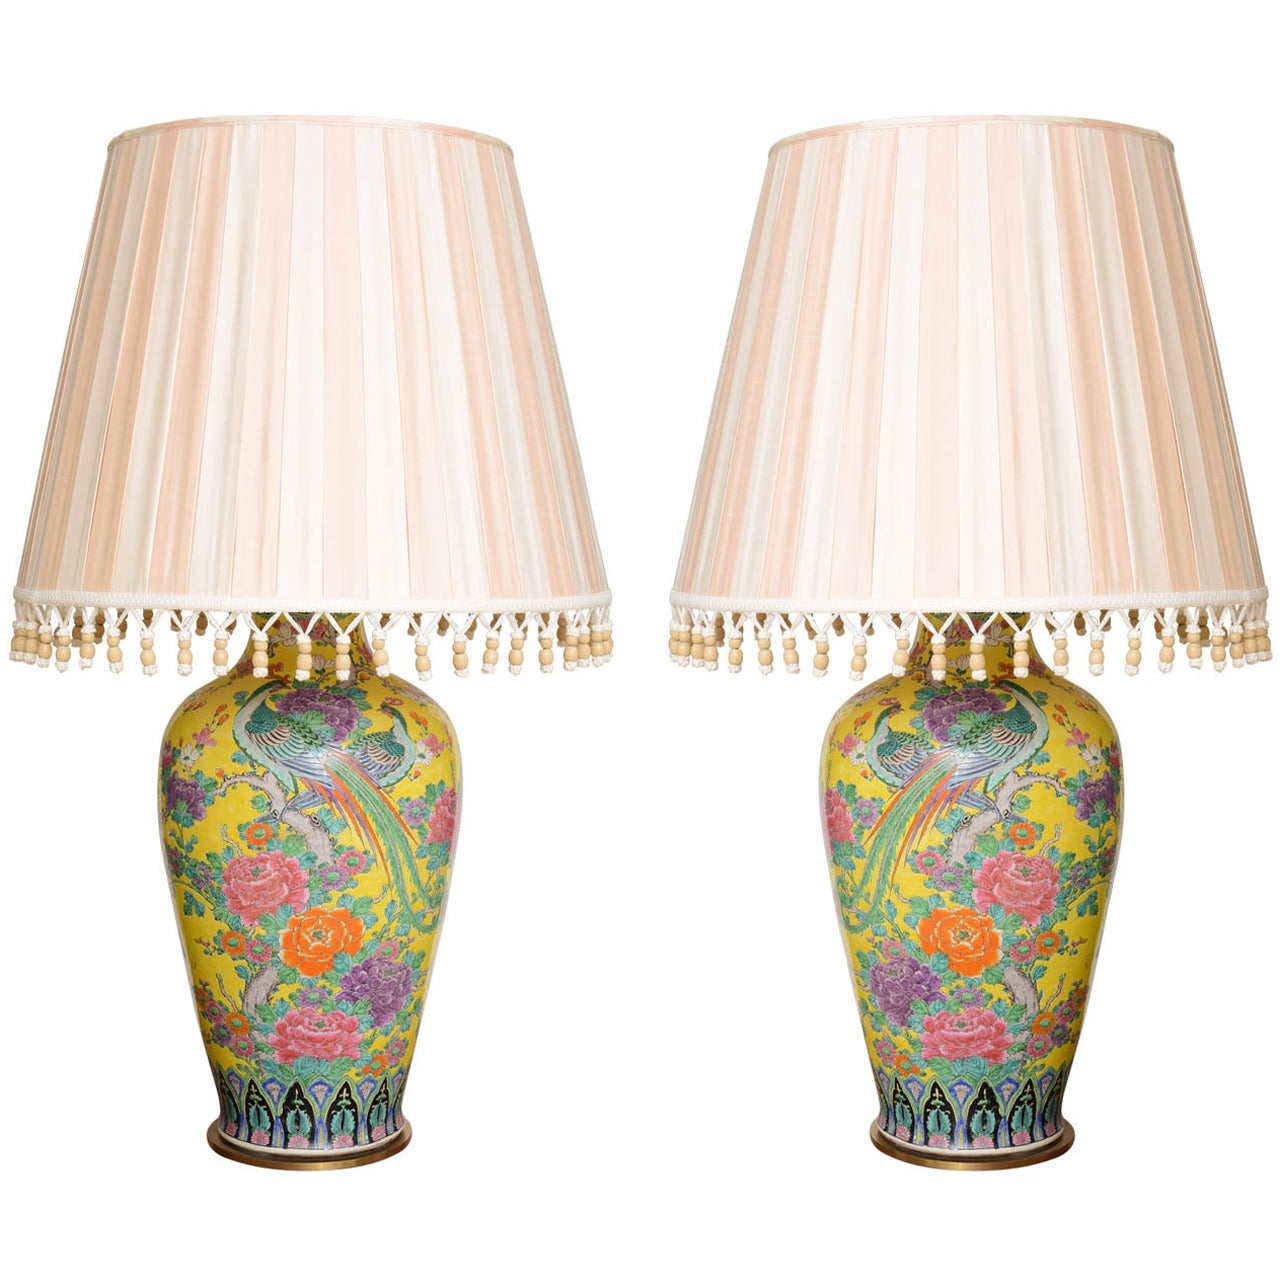 Monumental Pair of Chinese Export Porcelain Yellow Lamps